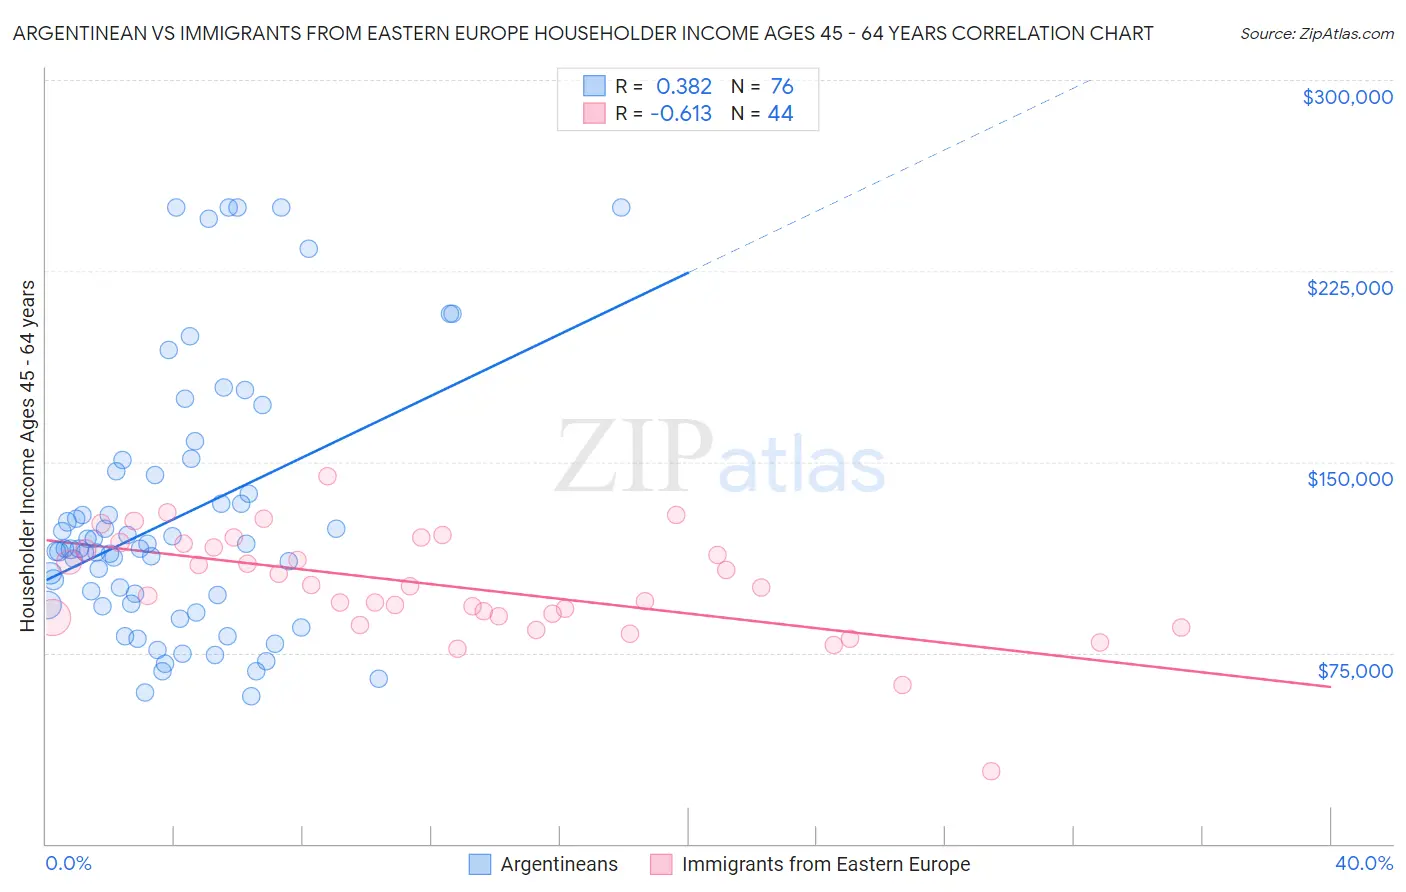 Argentinean vs Immigrants from Eastern Europe Householder Income Ages 45 - 64 years